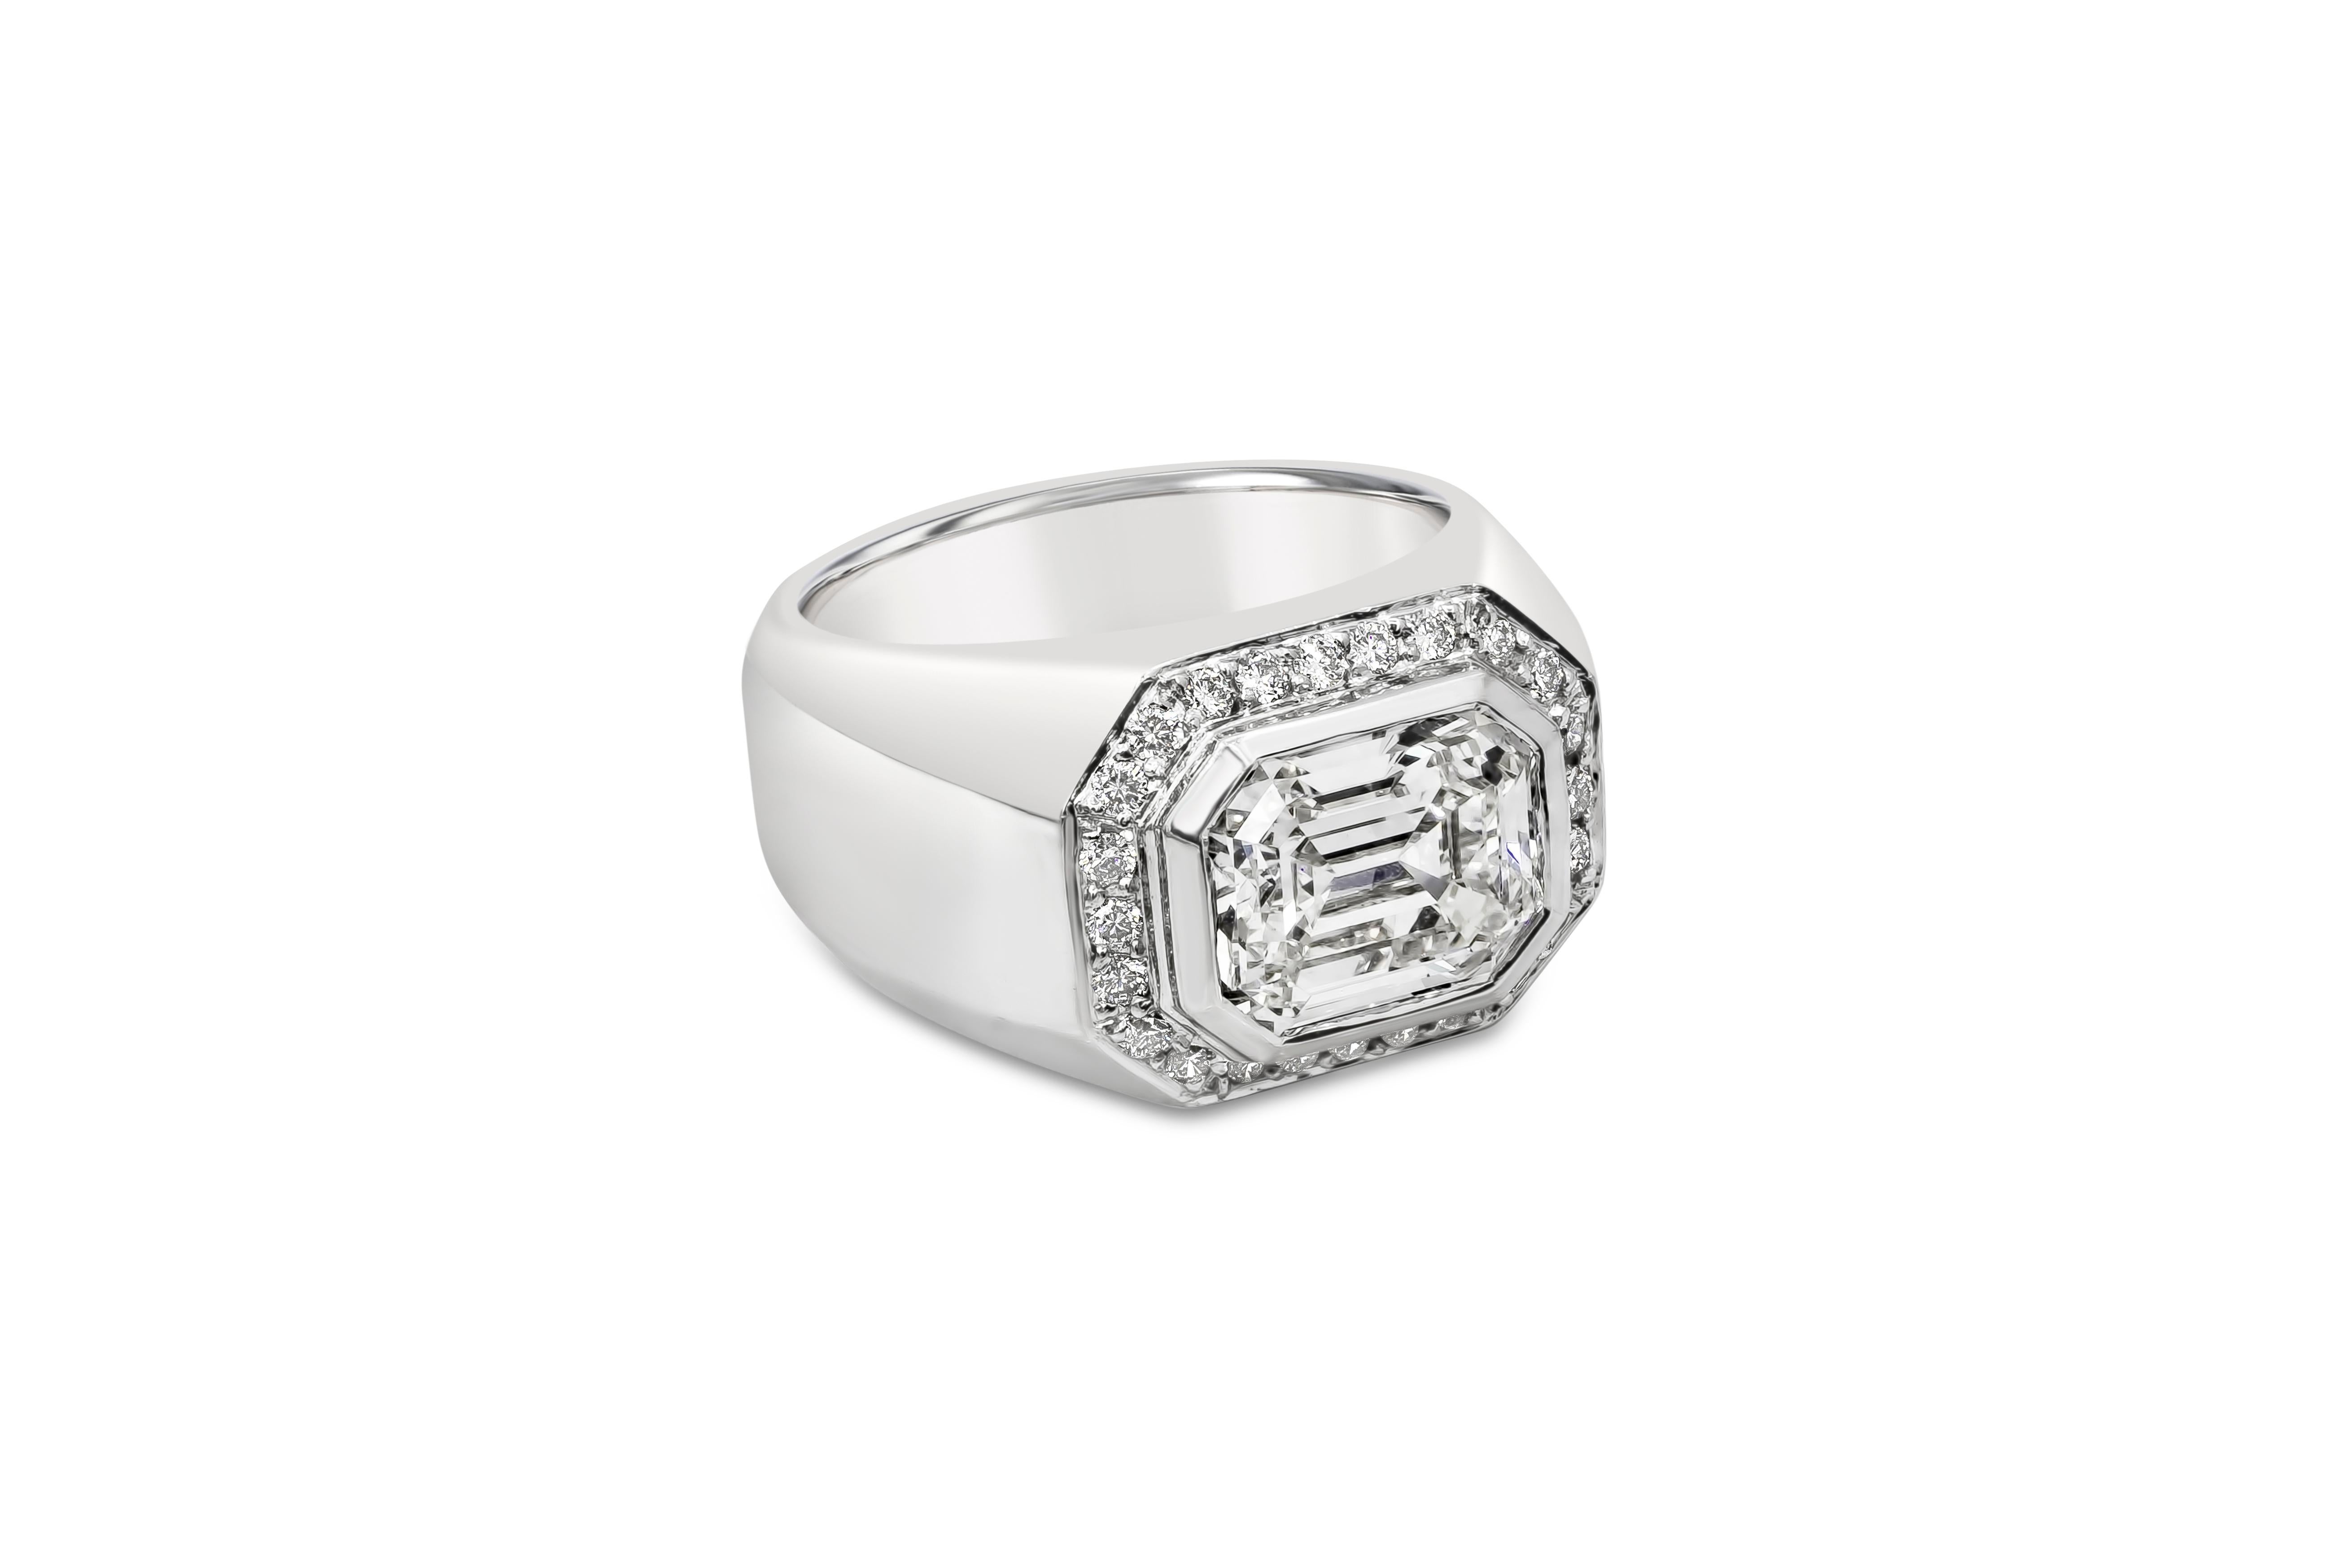 A marvelous mens ring features a dazzling bezel set GIA Certified 3.14 carat emerald cut diamond, H Color and IF in Clarity. Surrounded in an outer halo design by a row of round diamonds weighing 0.30 carats. Matte finish, Made in 14K White Gold,